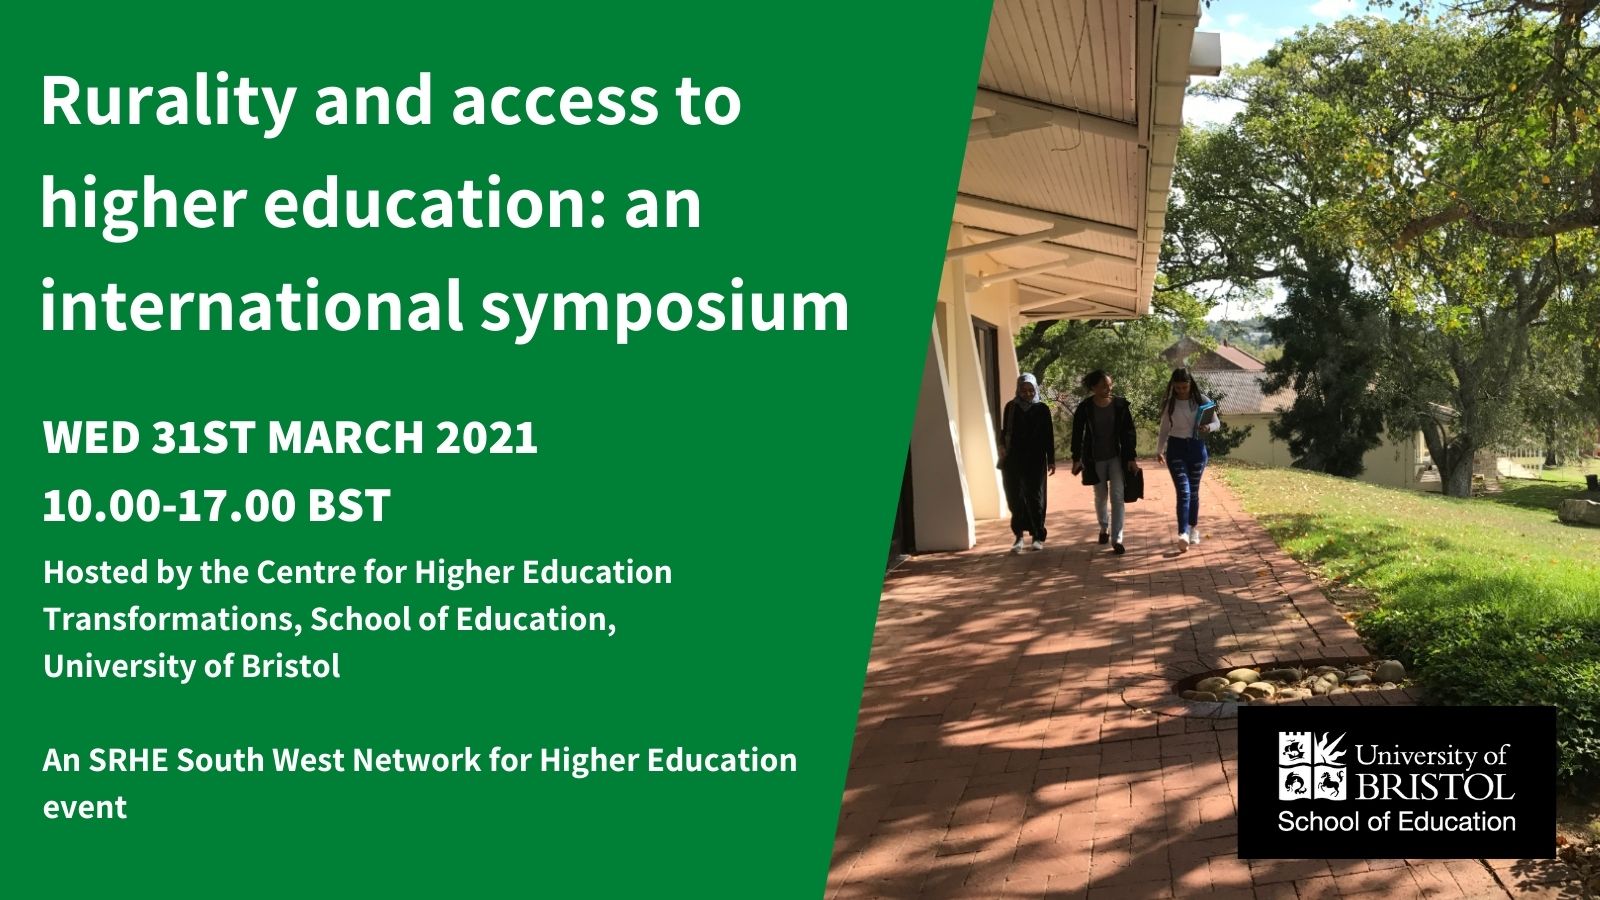 Rurality and access to higher education: an international symposium